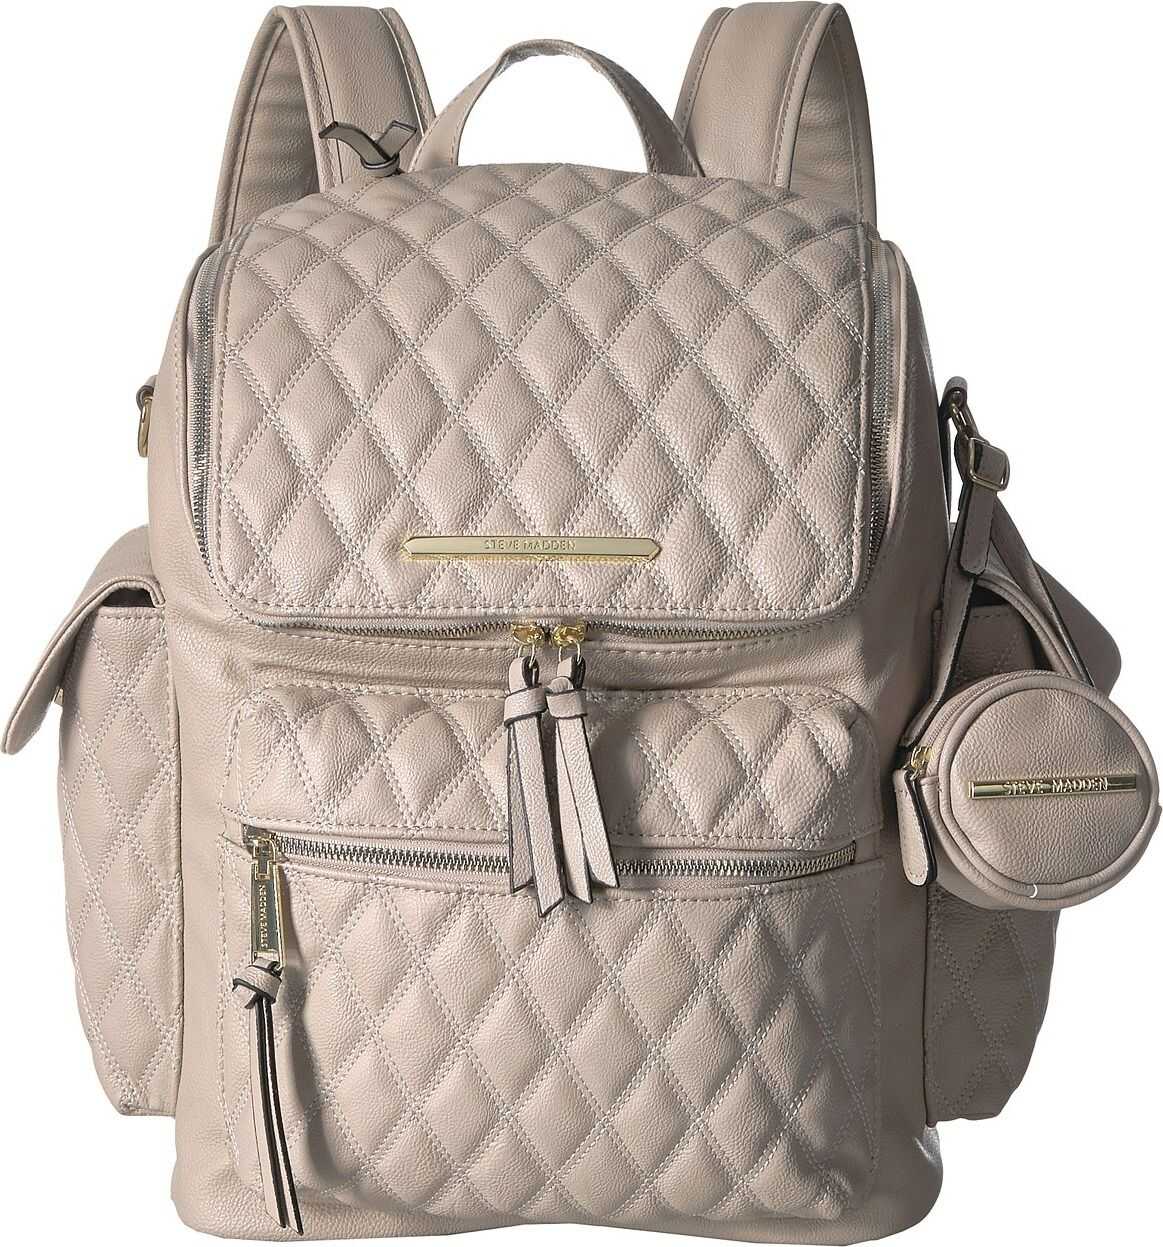 Steve Madden Surry Backpack Bisque